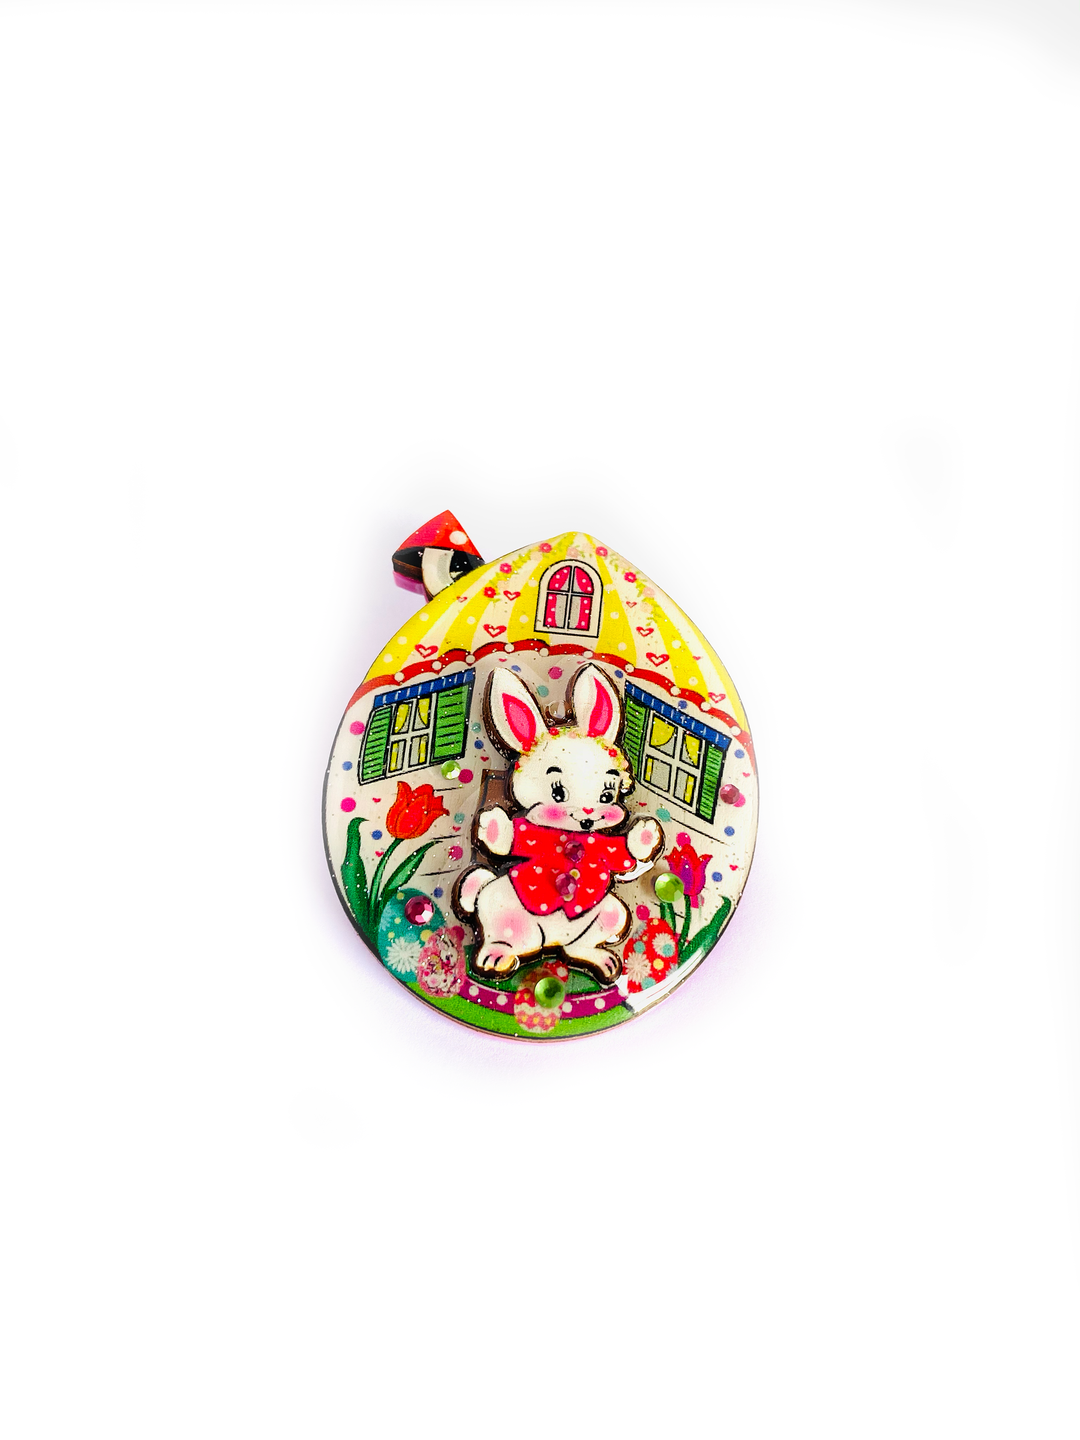 Bobby the Egg House Brooch by Rosie Rose Parker